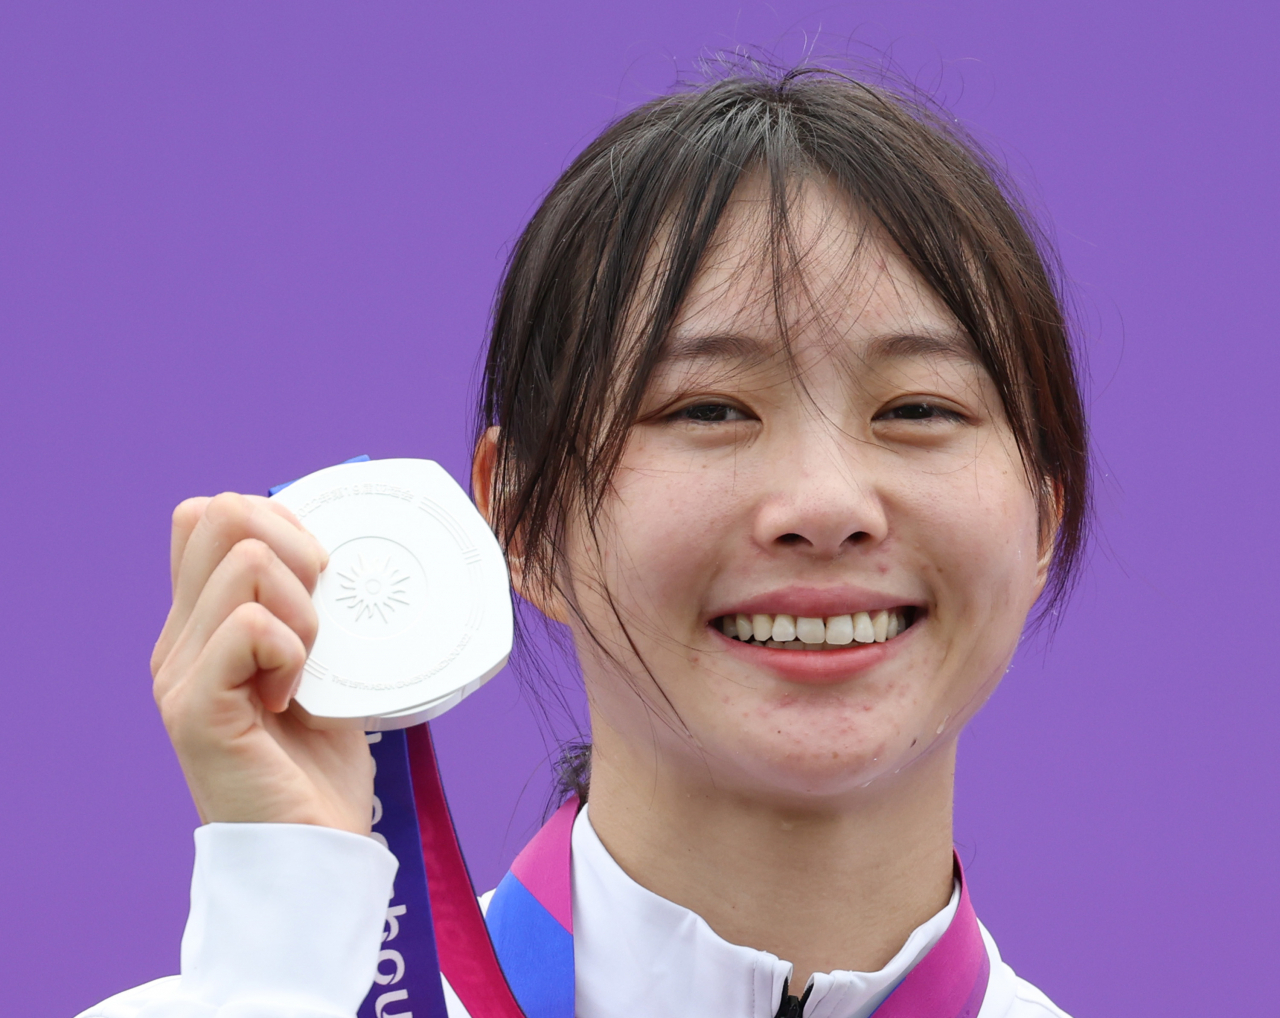 Kim Sun-woo poses for a photo after winning the silver medal at the women's individual modern pentathlon Sunday at the 19th Asian Games in Hangzhou, China. (Yonhap)